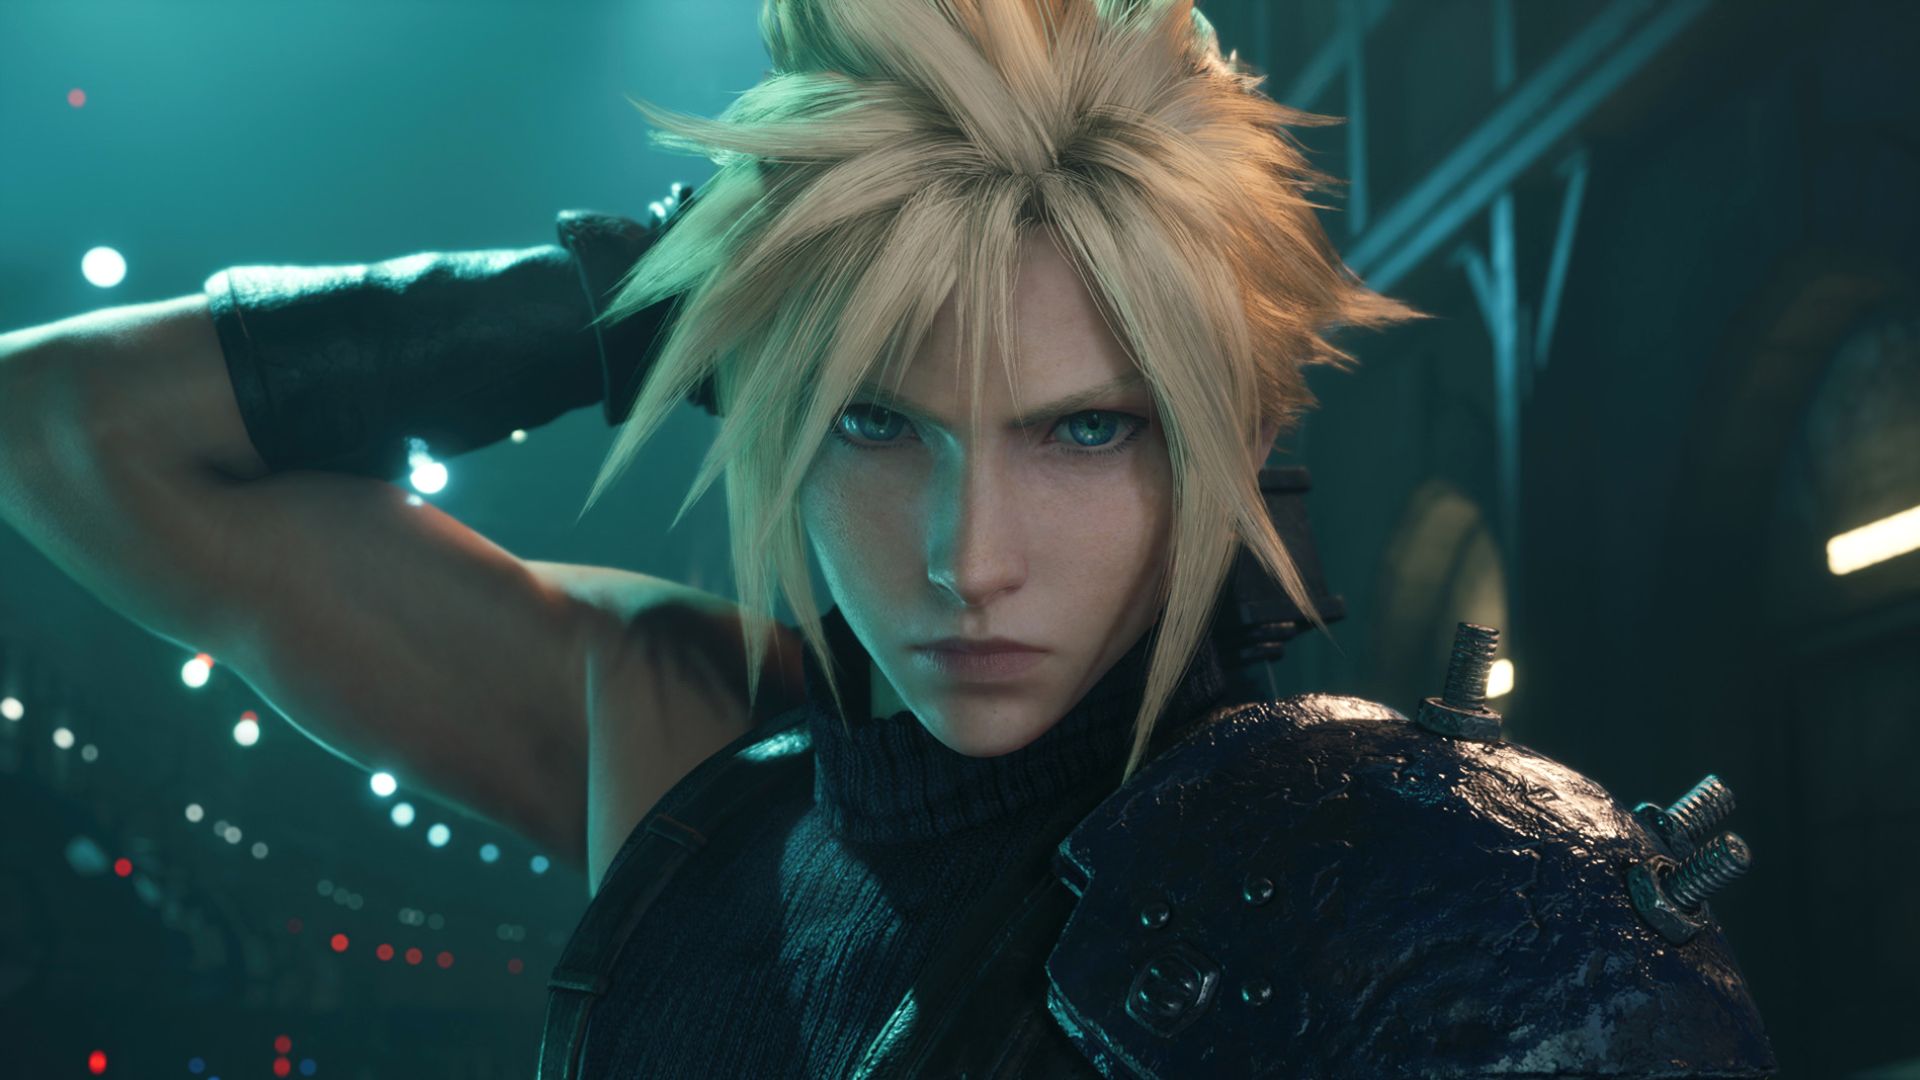 Final Fantasy 7 Remake Switch release date speculation